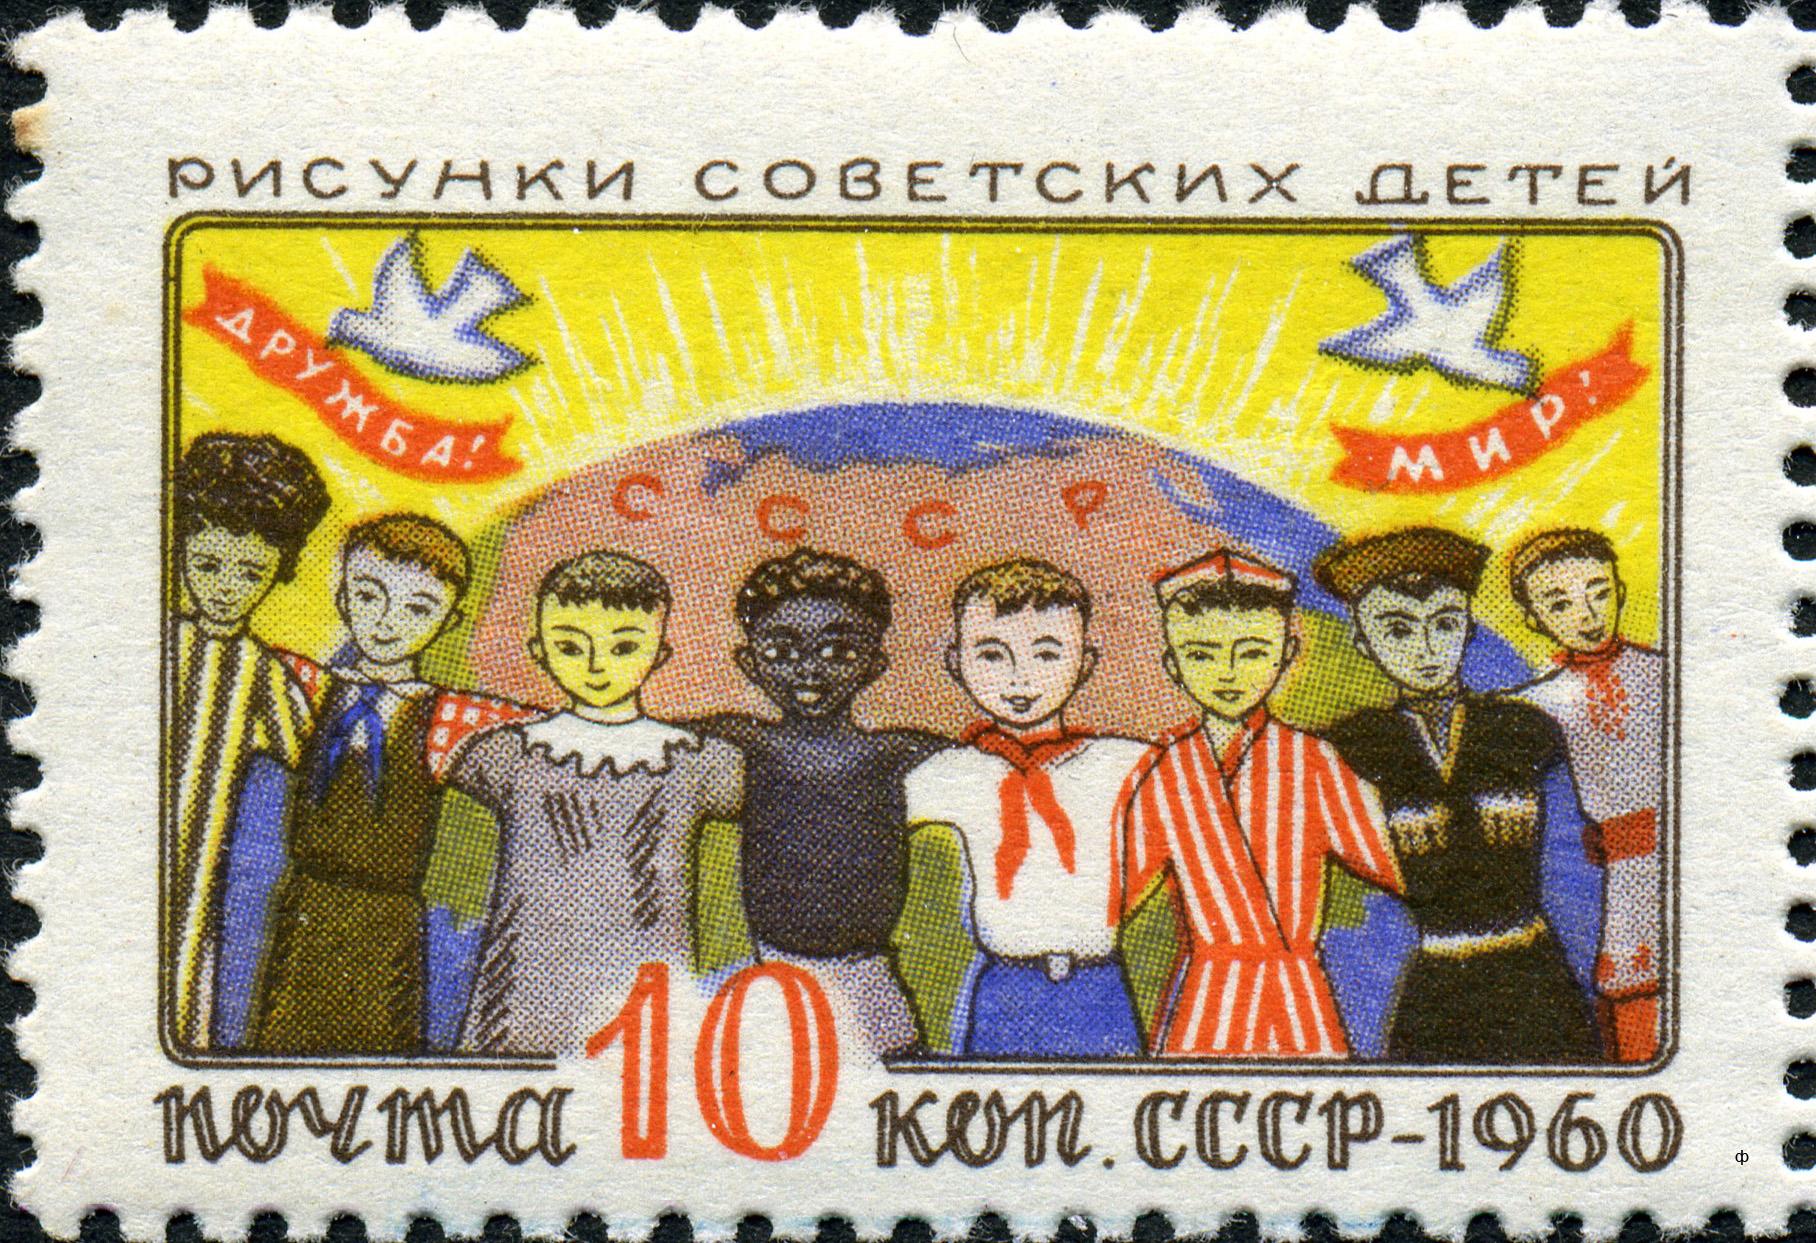 A Soviet anti-racism stamp from 1960 featuring a black child with typical blackface imagery. 